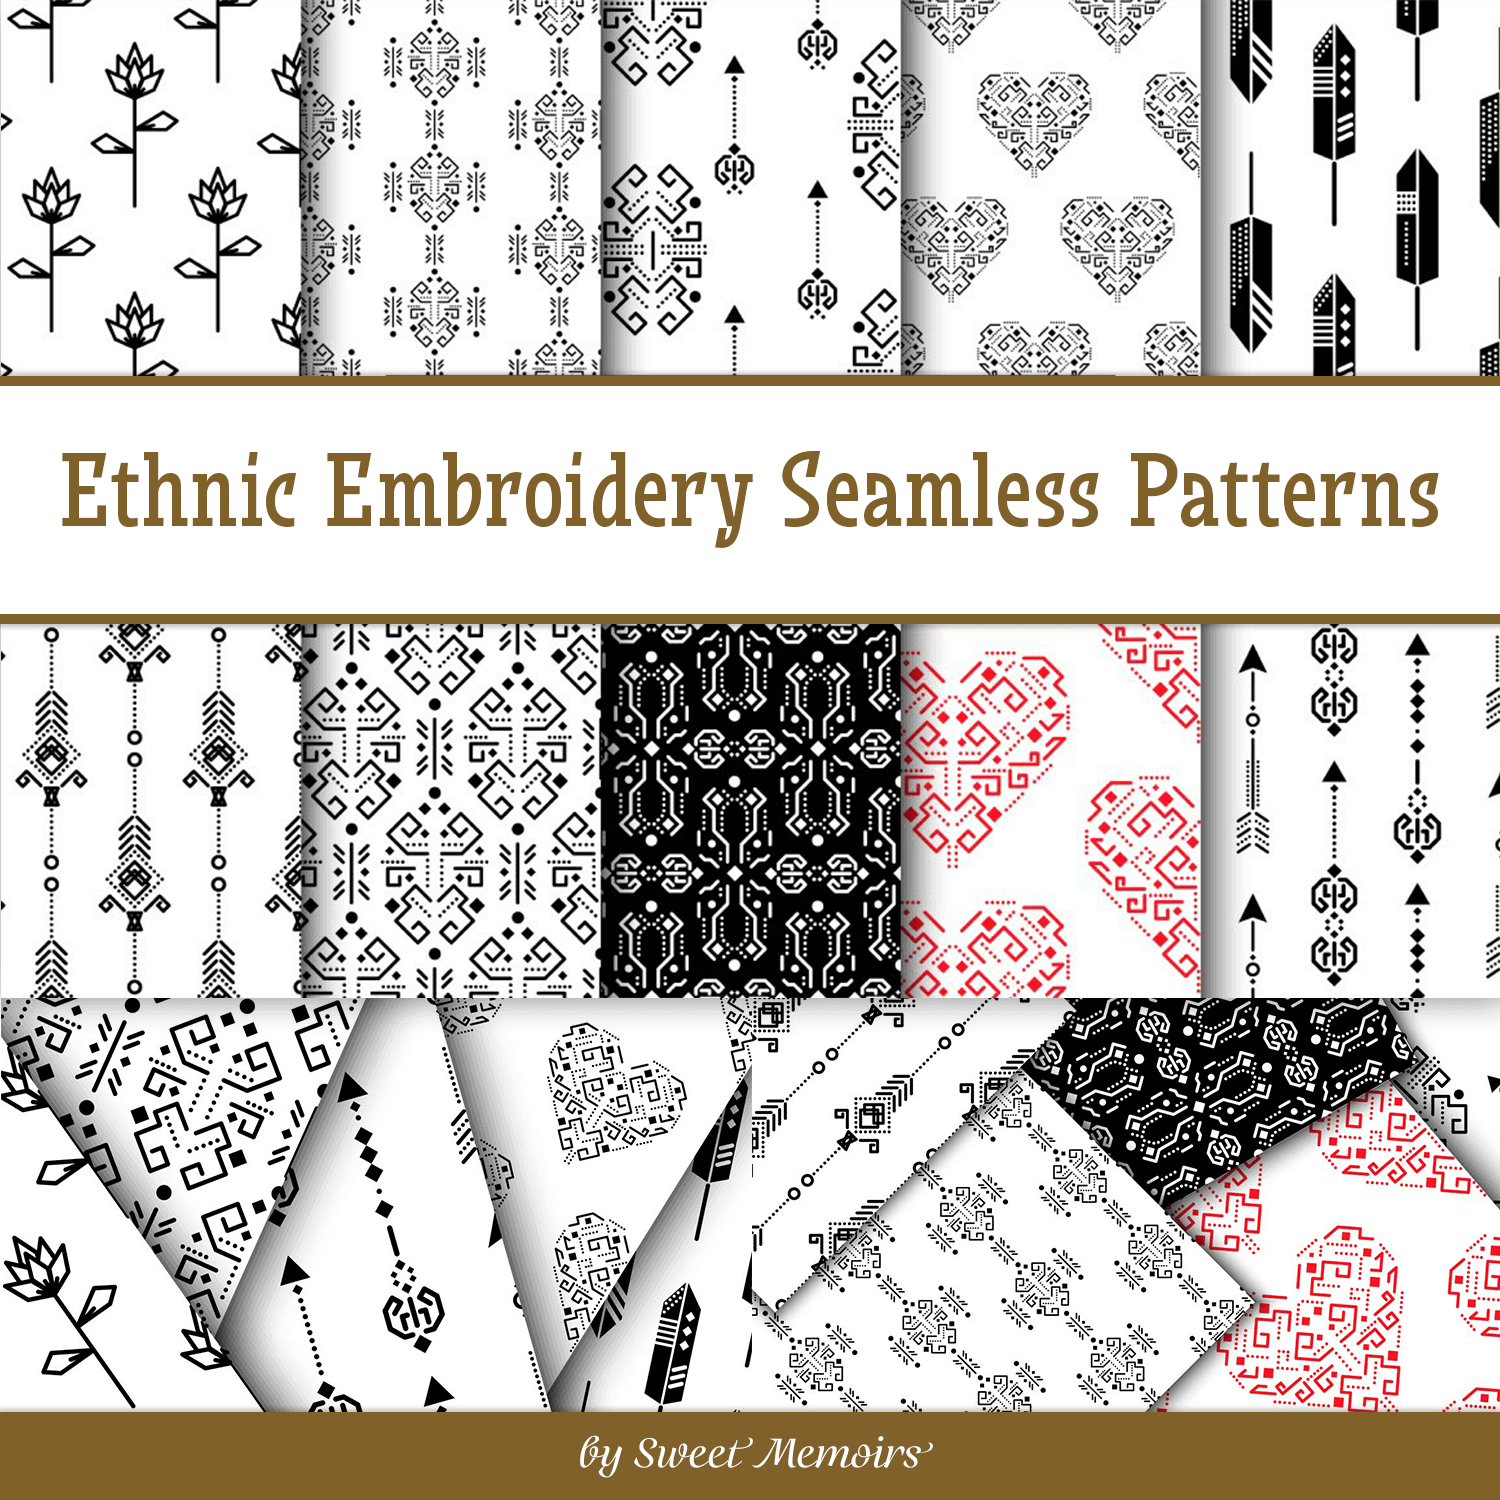 10 Ethnic Embroidery Seamless Patterns in Black, Red and White Colors.